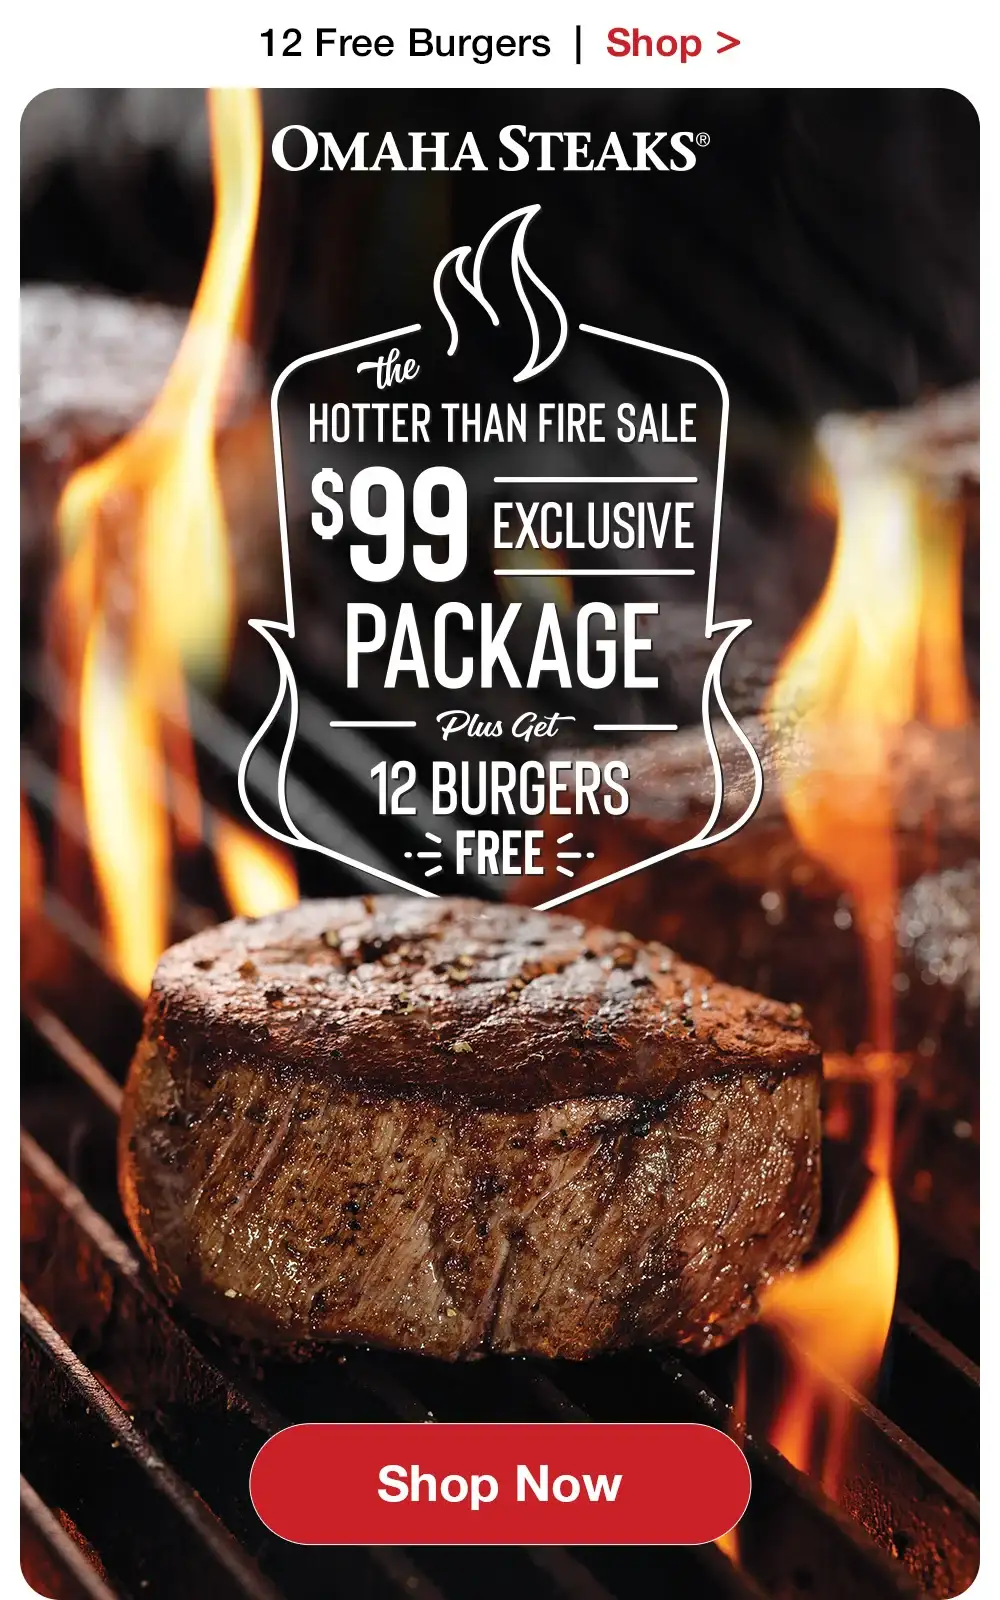 12 FREE BURGERS | the HOTTER THAN FIRE SALE \\$99 EXCLUSIVE PACKAGE | Plus Get 12 BURGERS FREE || Shop Now